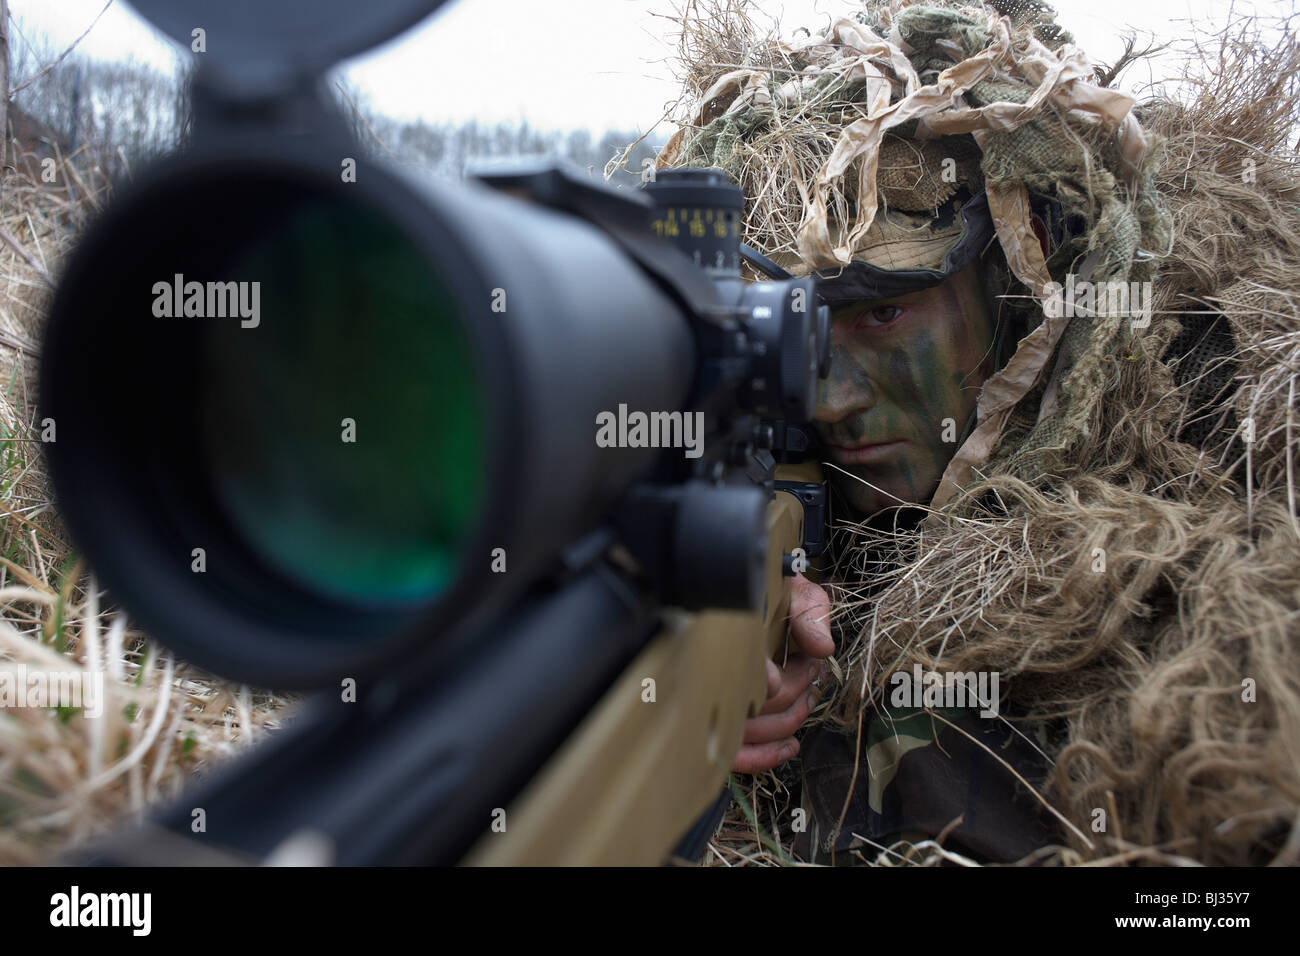 Lying in undergrowth, a camouflaged British infantry soldier is seen looking down the telescopic sight of a L115A3 rifle. Stock Photo